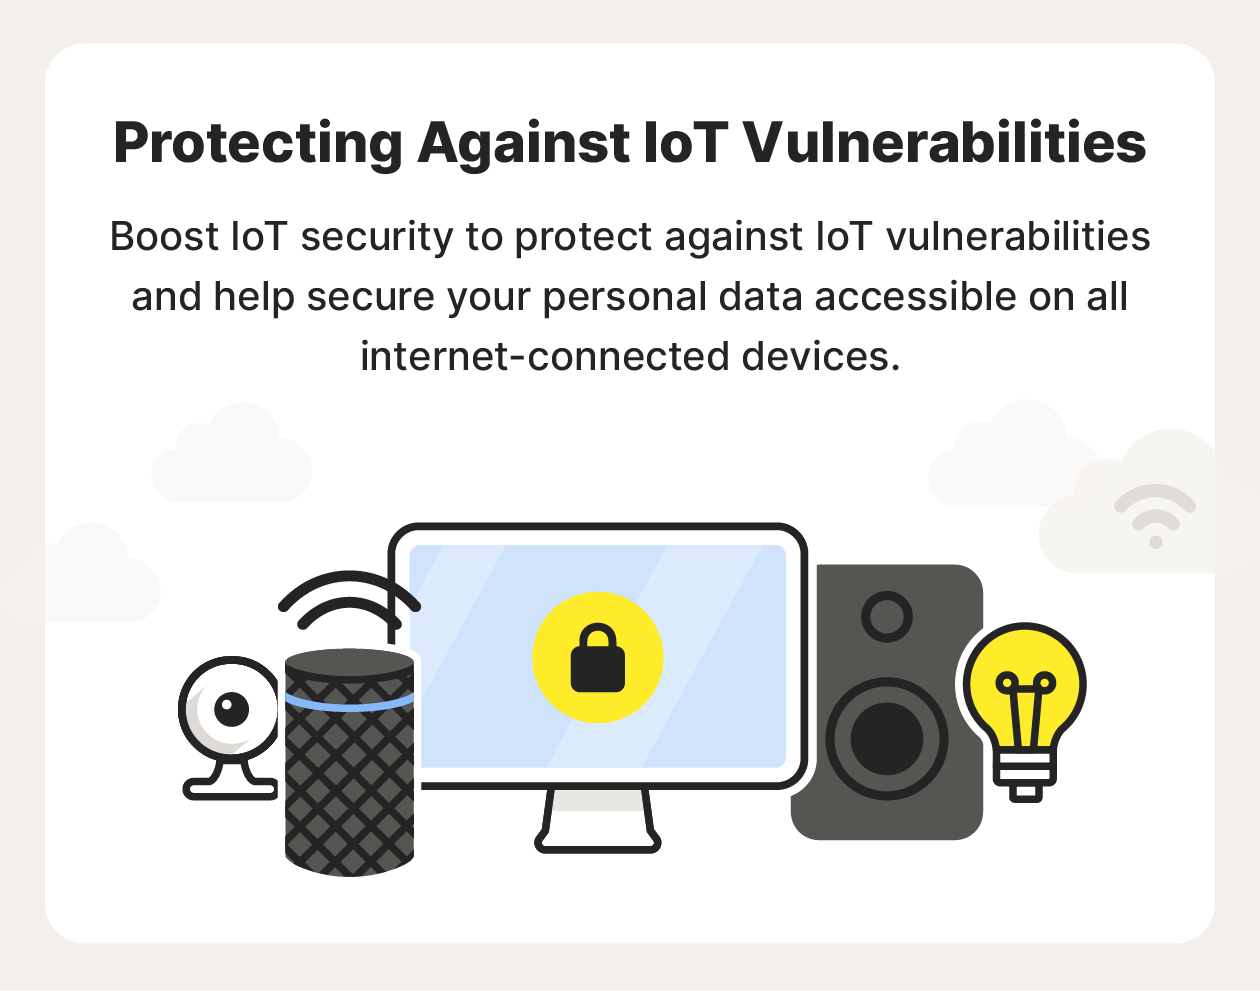 You can protect against IoT vulnerabilities by boosting your IoT device security.